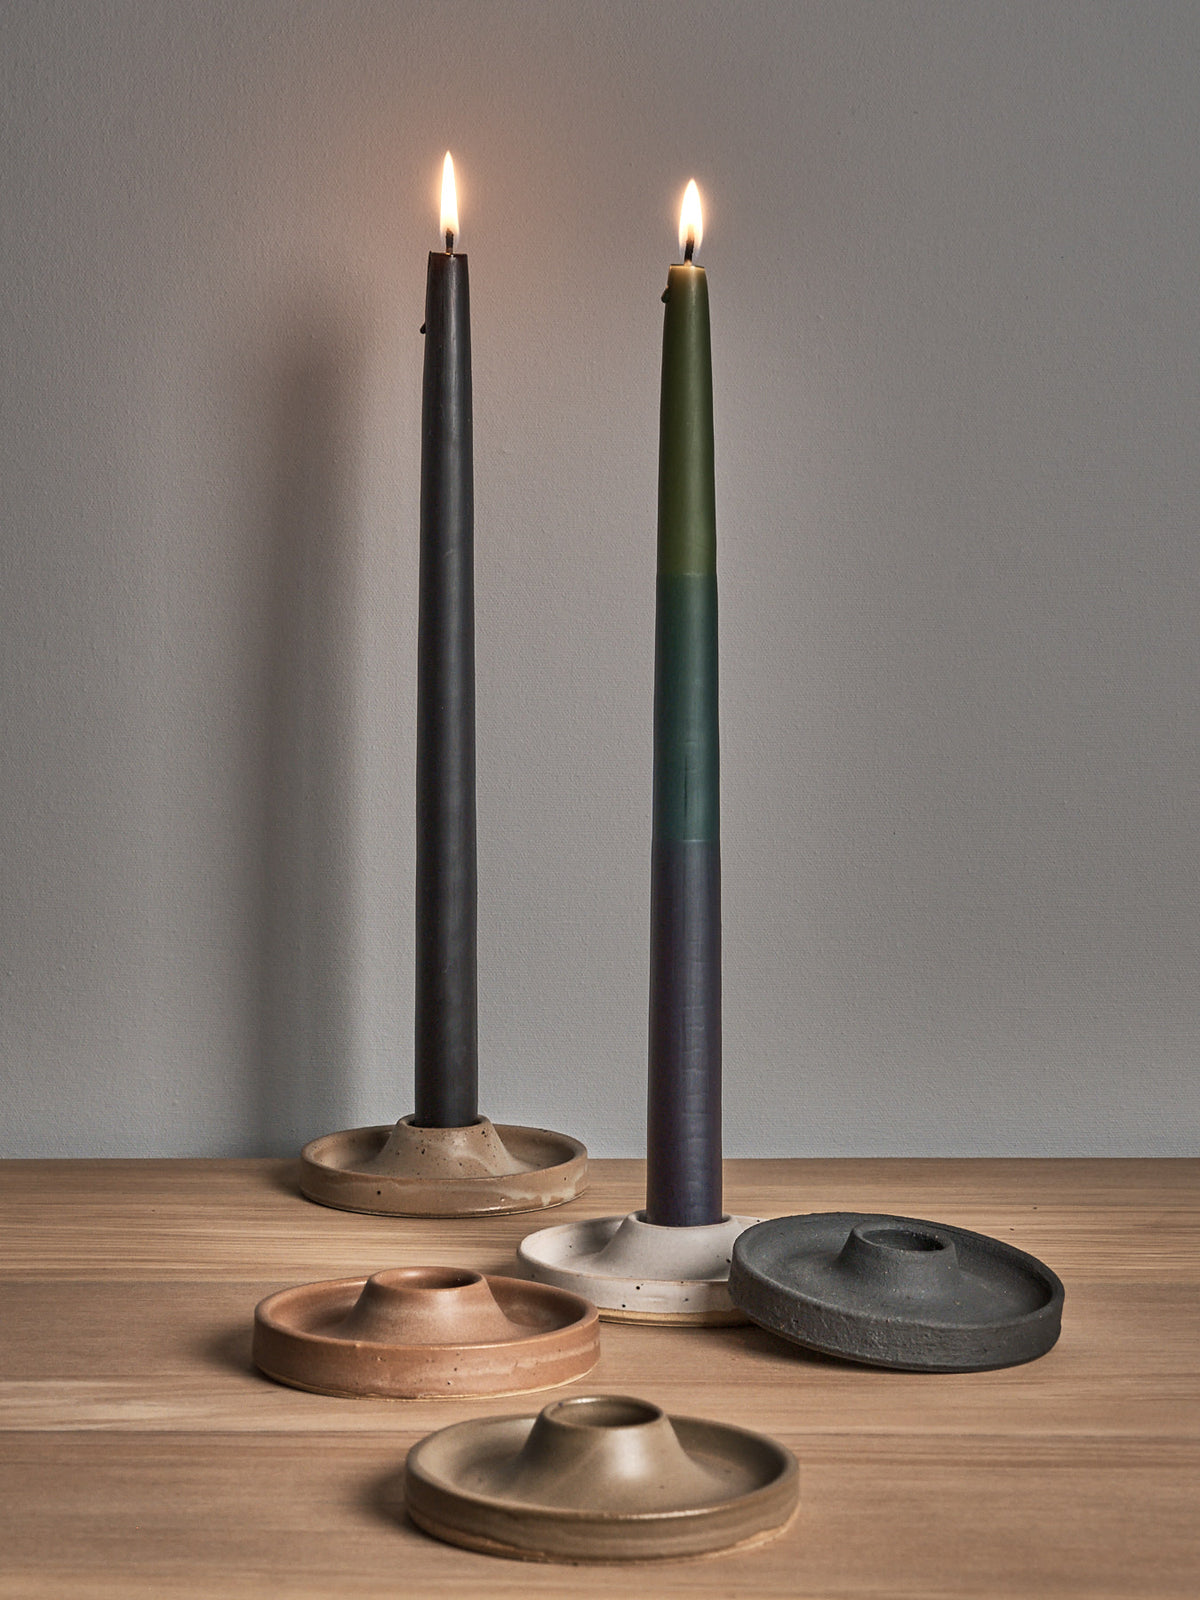 Three Deborah Sweeney candle holders in the Moss design on a wooden table next to each other.